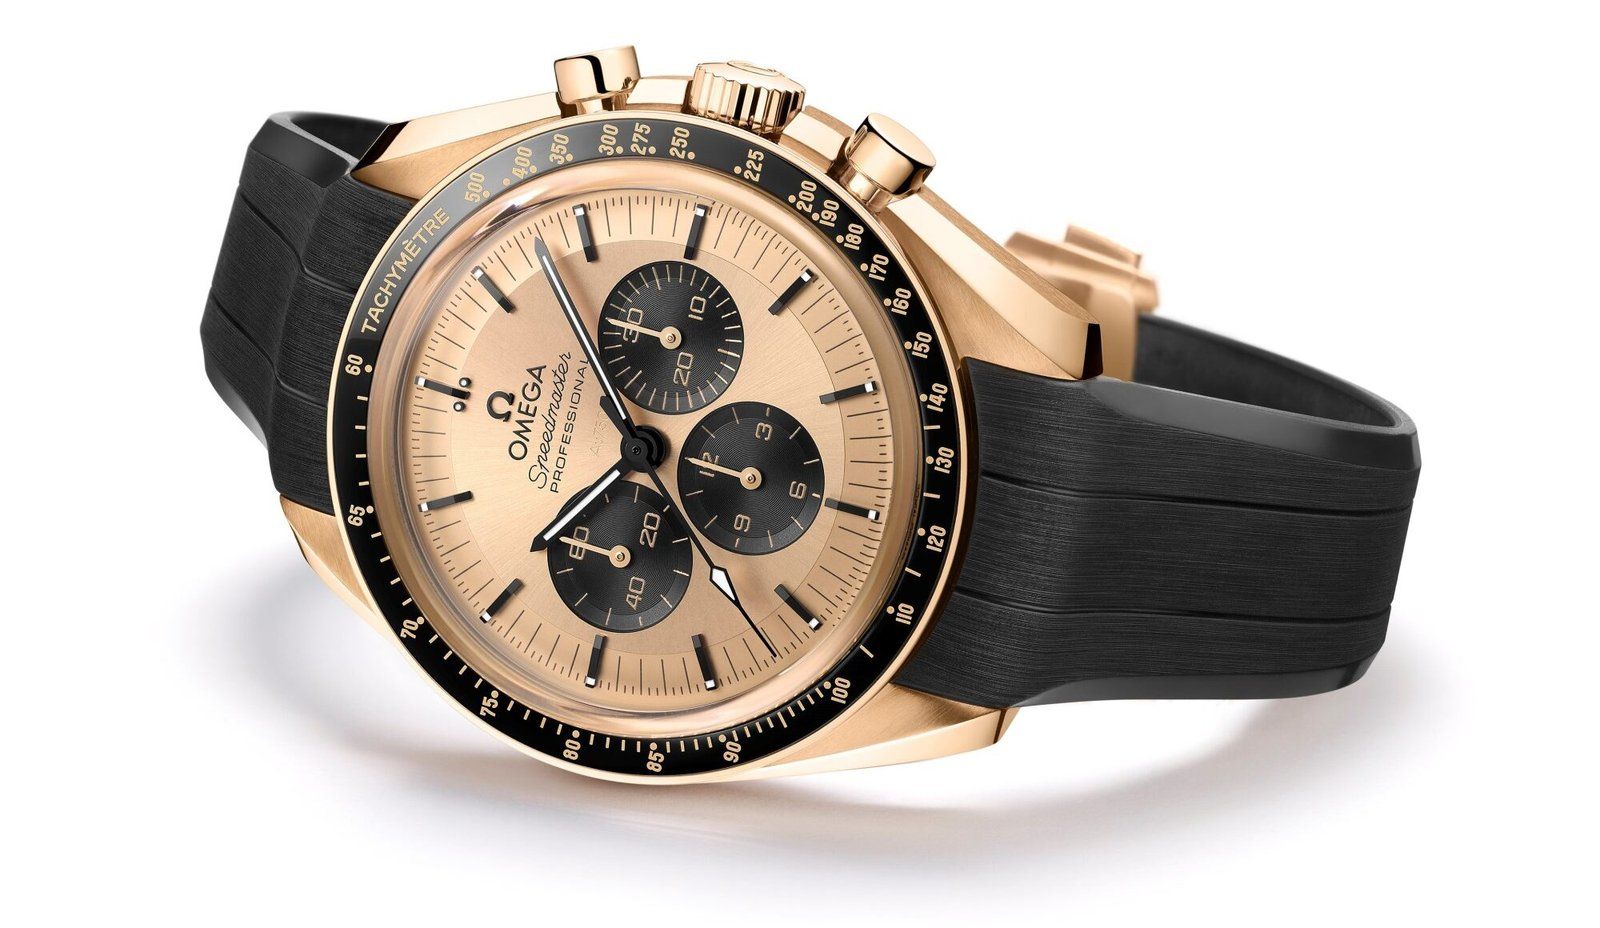 Omega CEO Raynald Aeschlimann on the Speedmaster ‘57 and preserving exclusivity